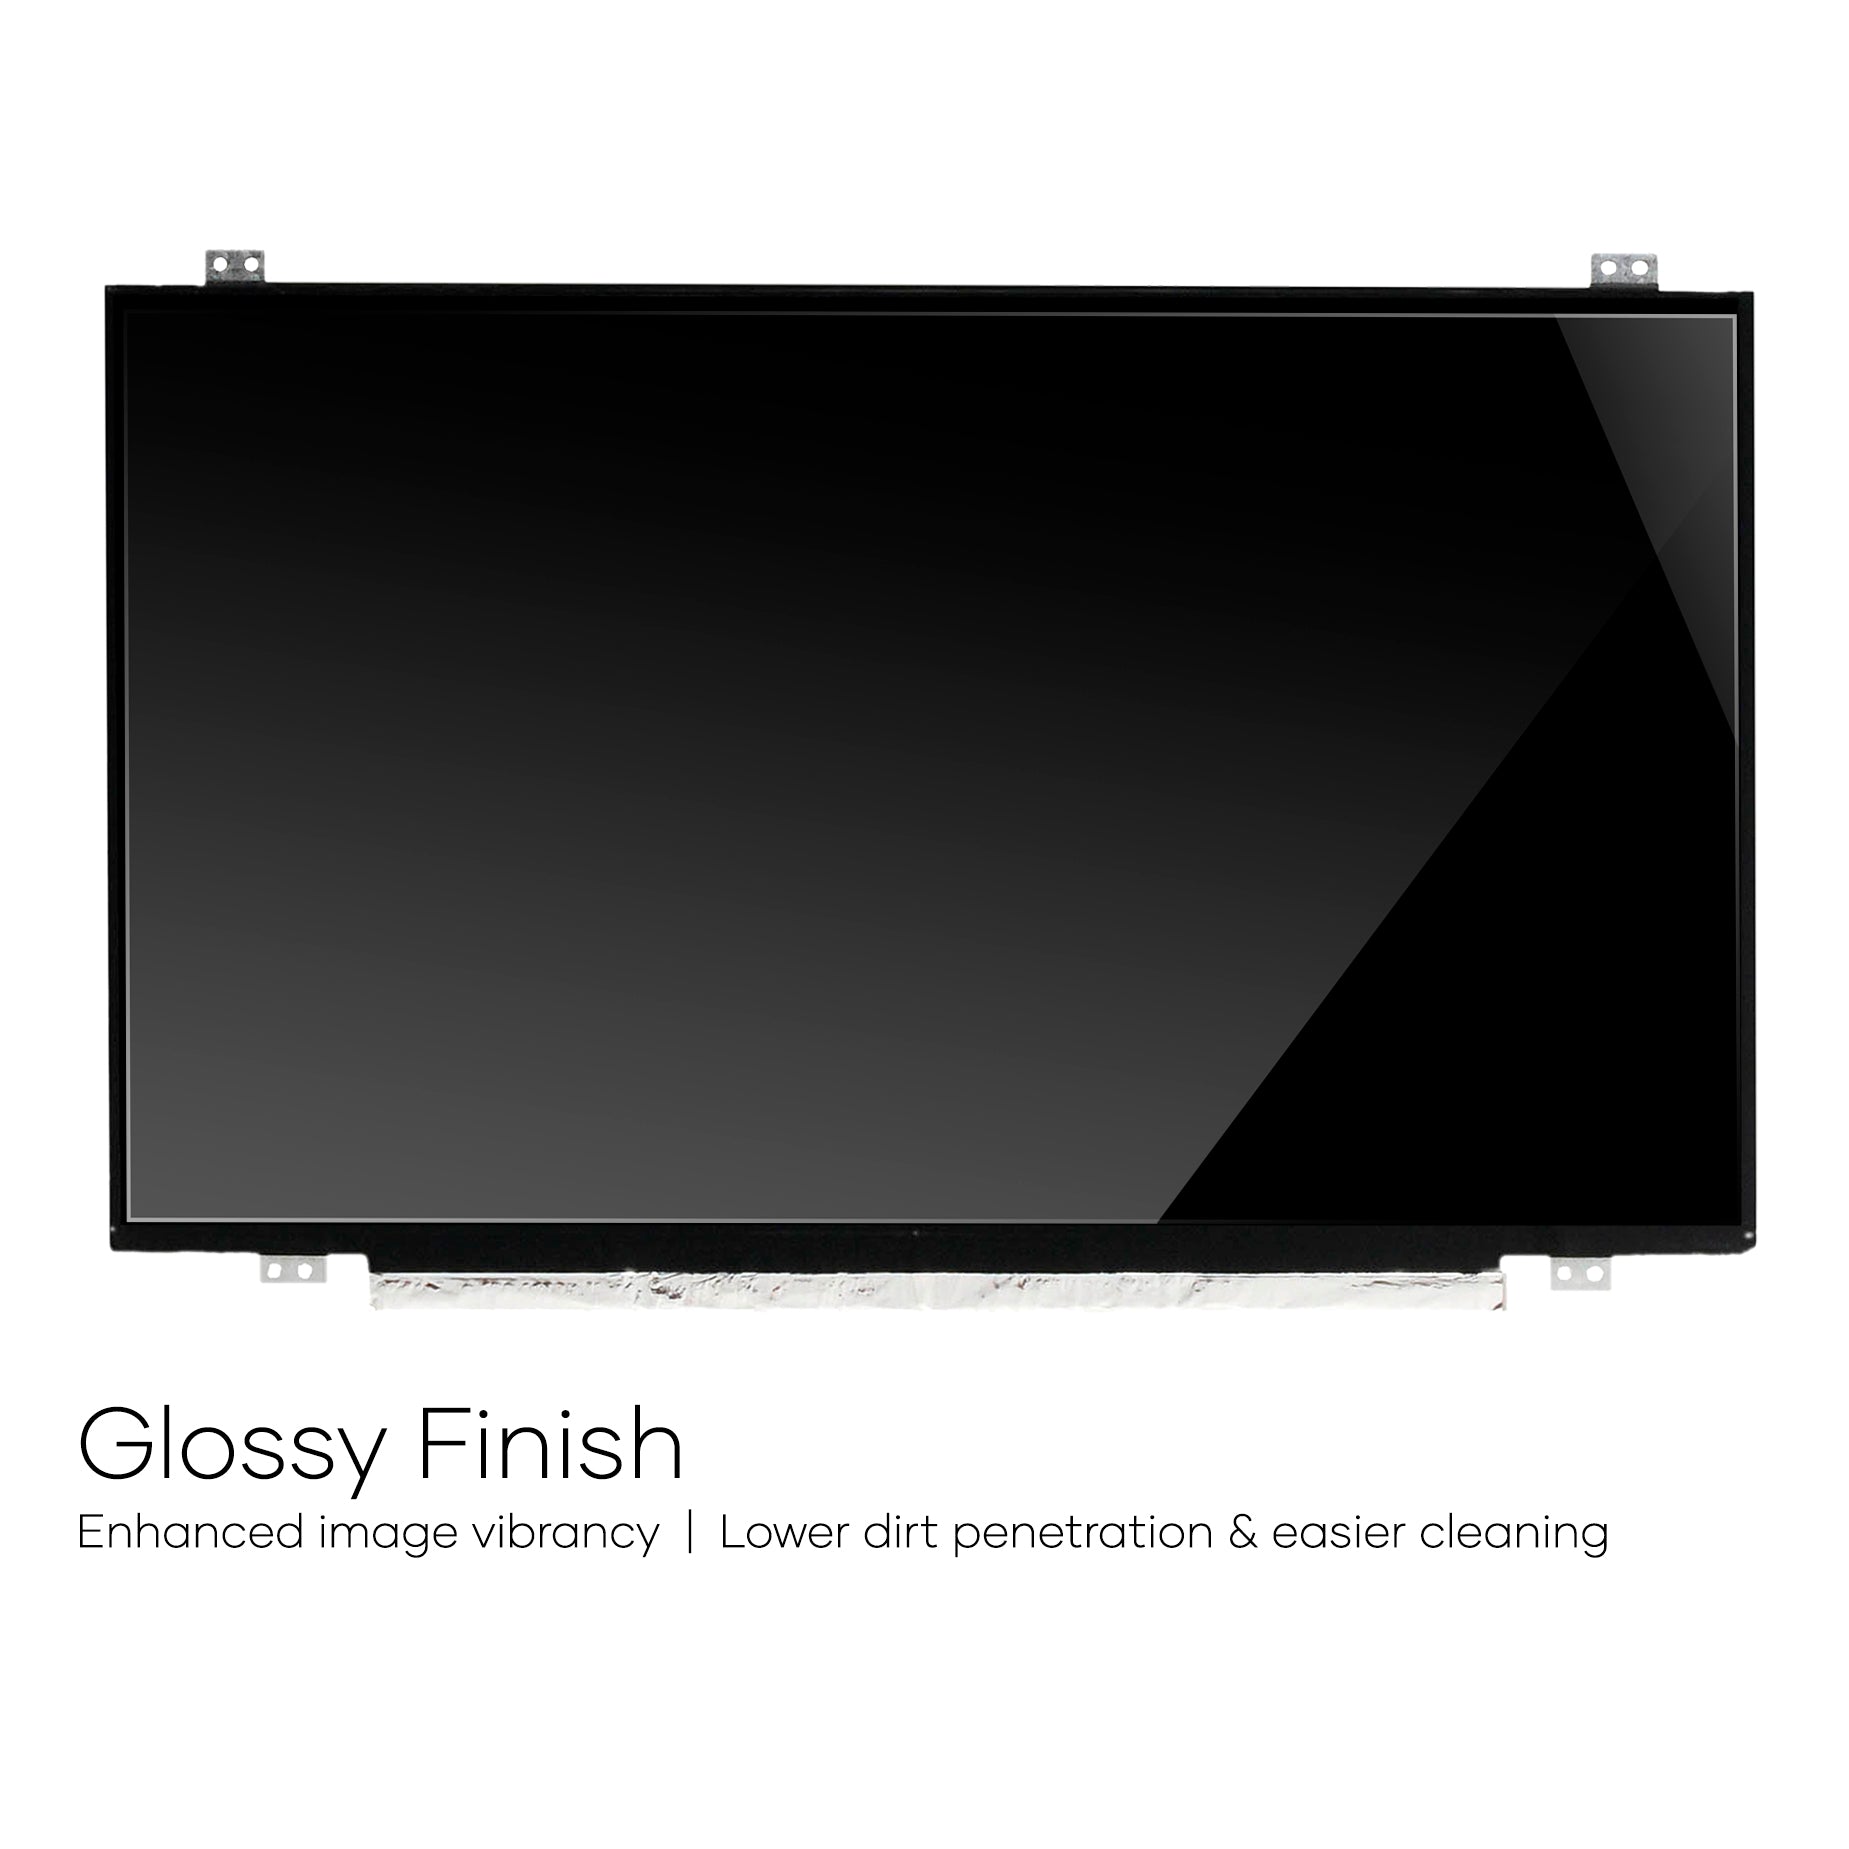 Screen Replacement for G140XTN01.0 HD 1366x768 Glossy LCD LED Display